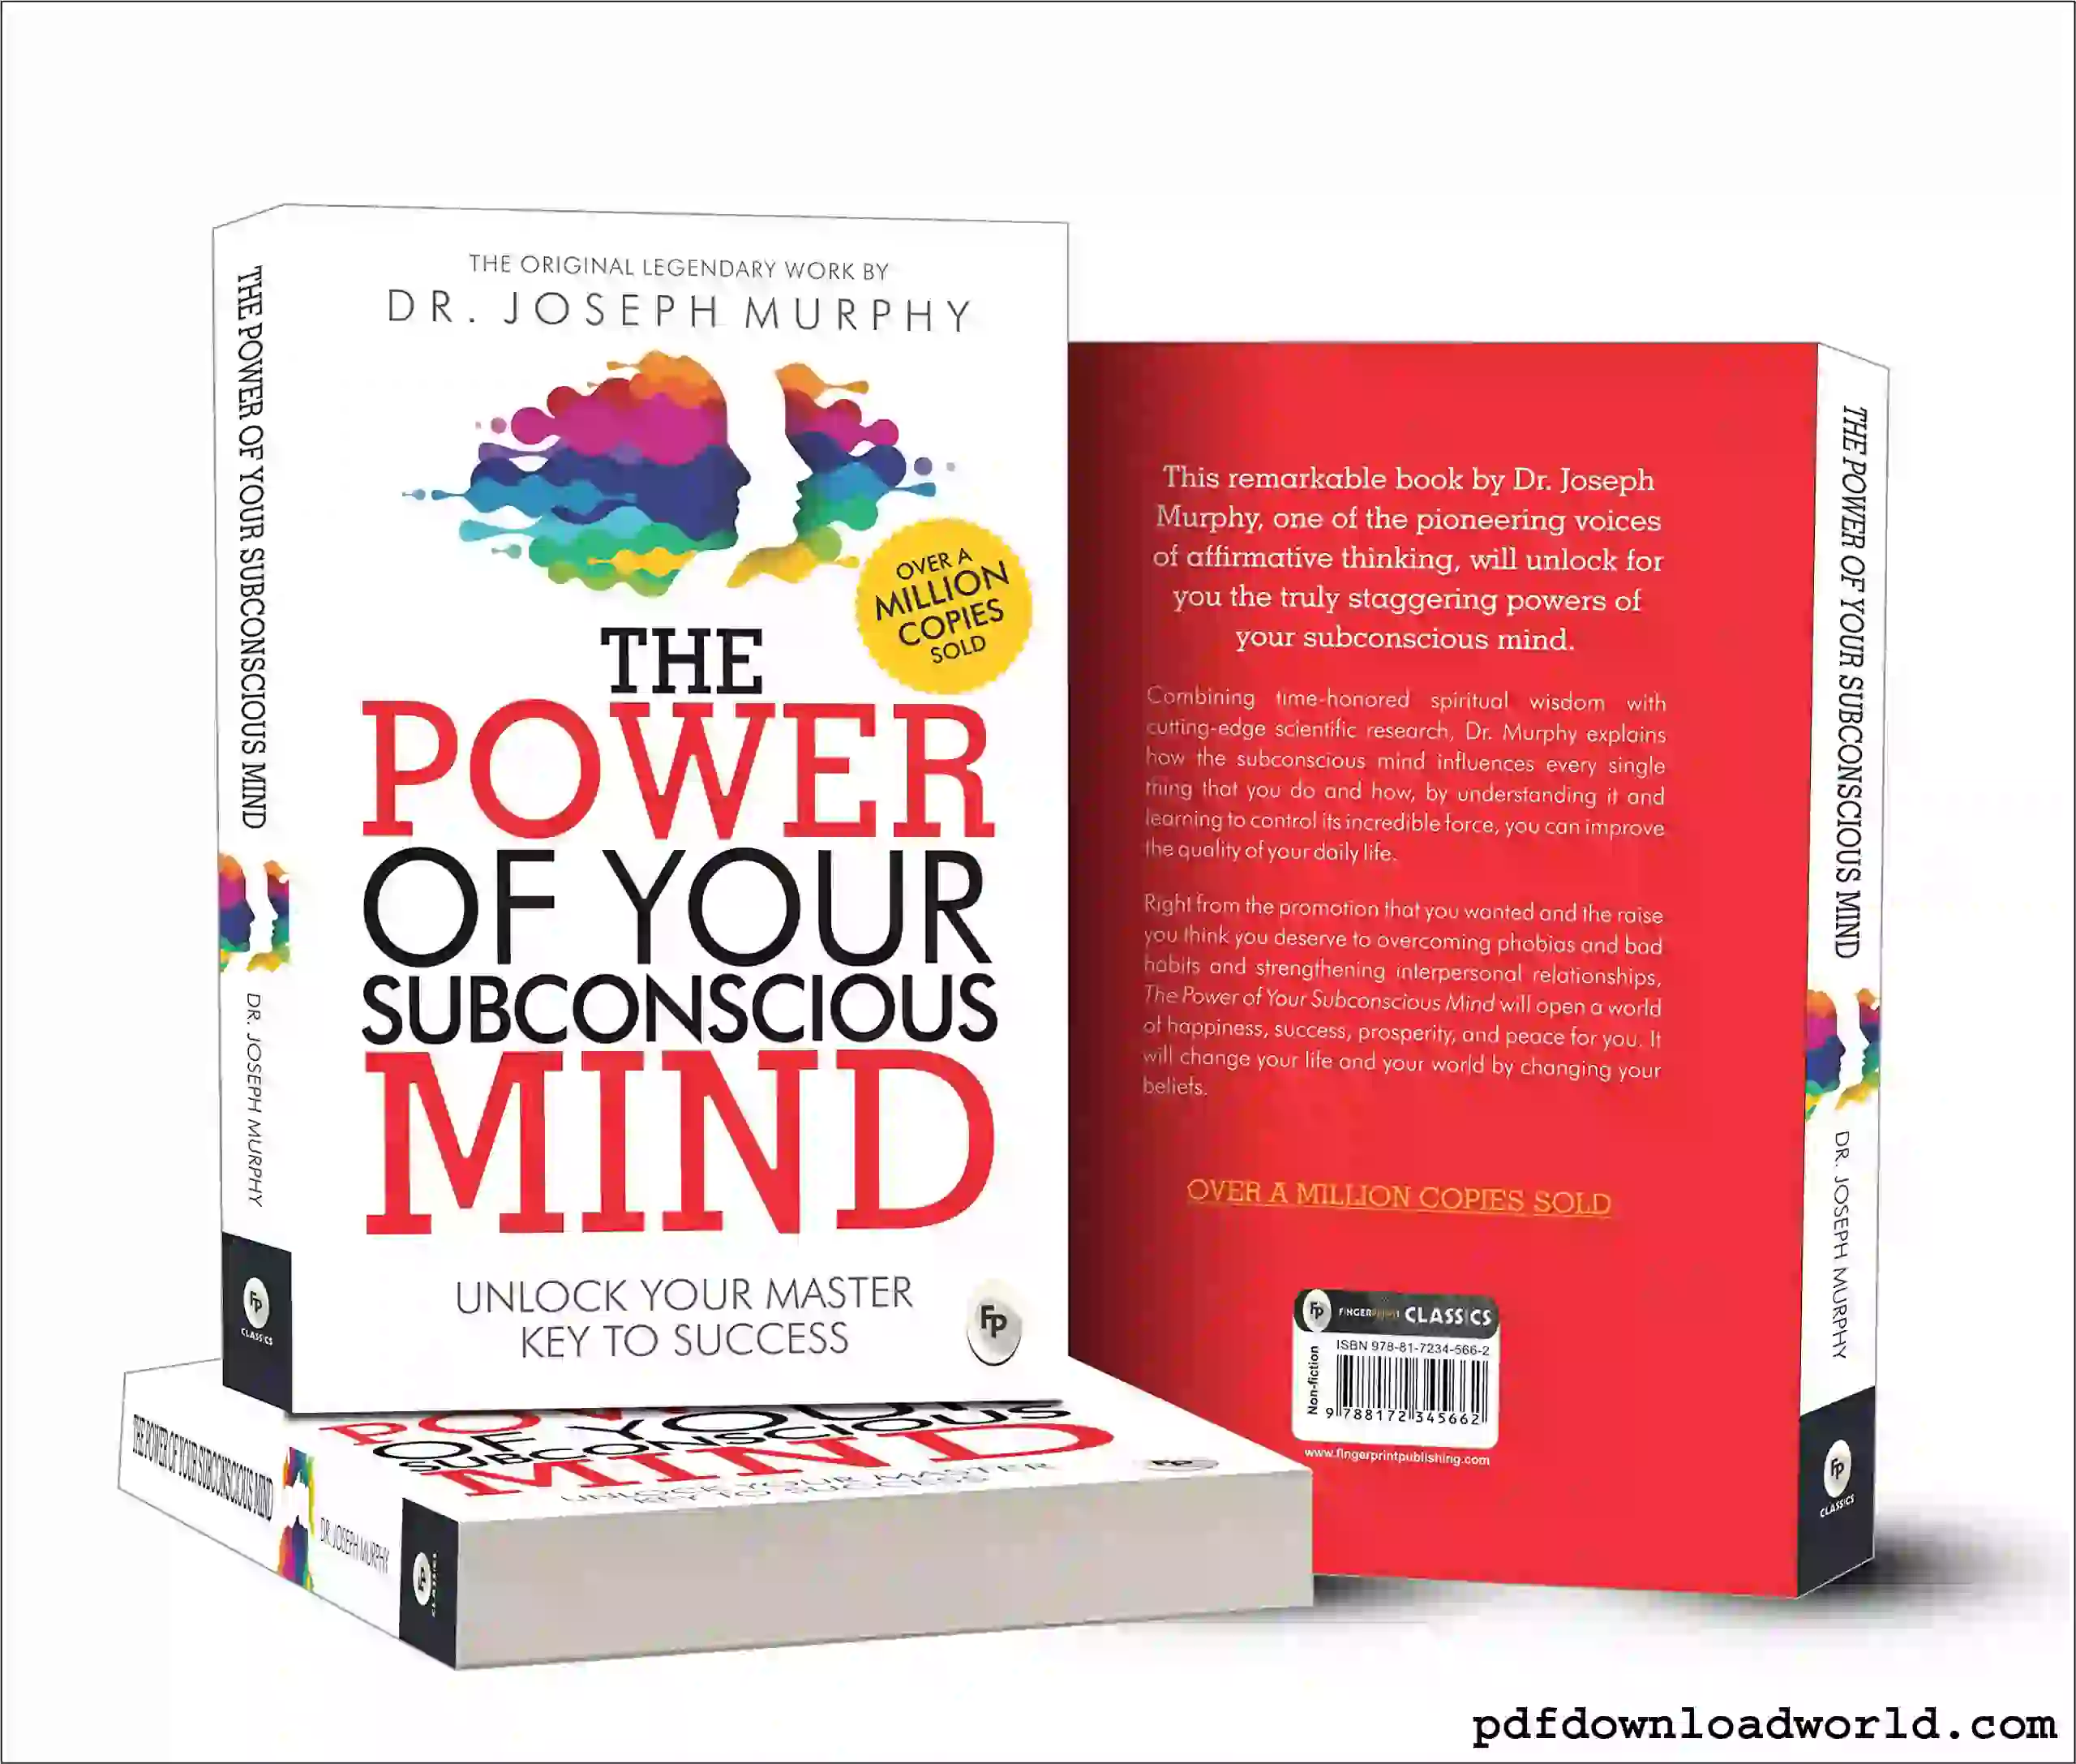 The Power Of Your Subconscious Mind In English PDF, The Power Of Your Subconscious Mind PDF, The Power Of Your Subconscious Mind PDF Download, Power Of Subconscious Mind Book PDF, Power Of Your Subconscious Mind PDF,The Power Of Your Subconscious Mind PDF